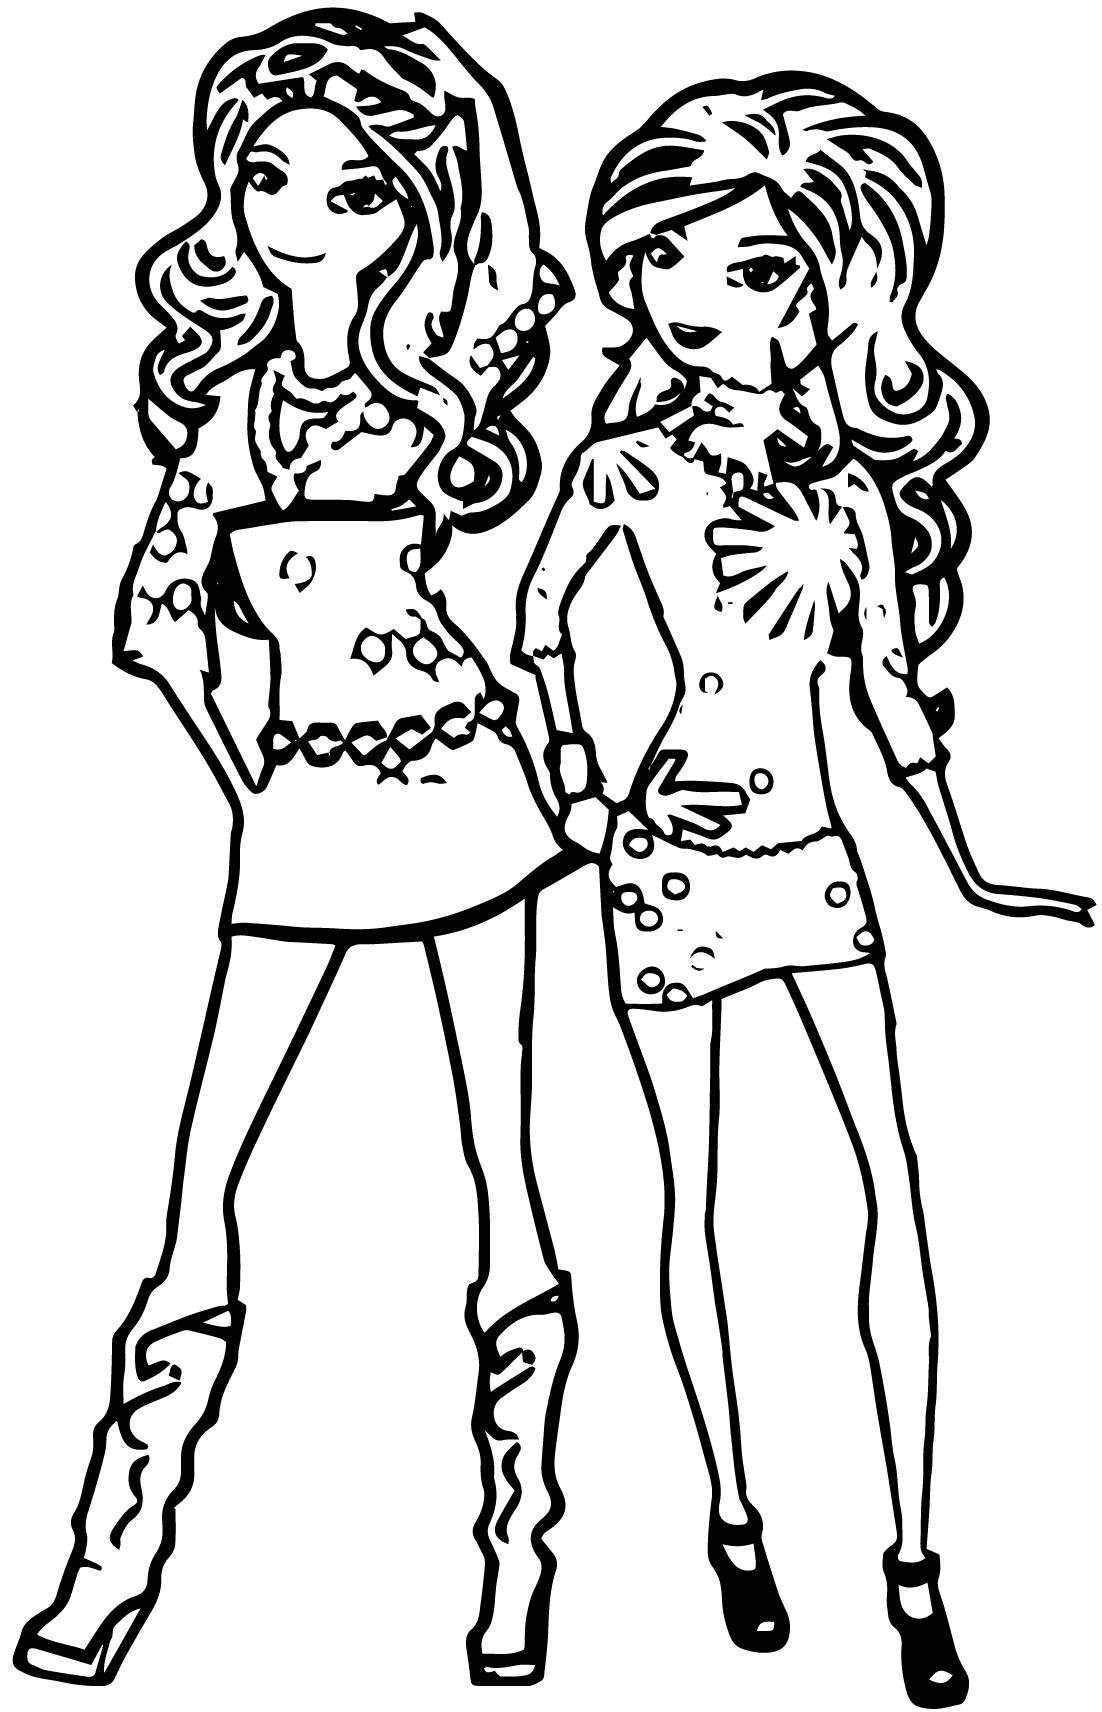 Friendship Coloring Pages For Girls
 Best Friend Coloring Pages coloringsuite